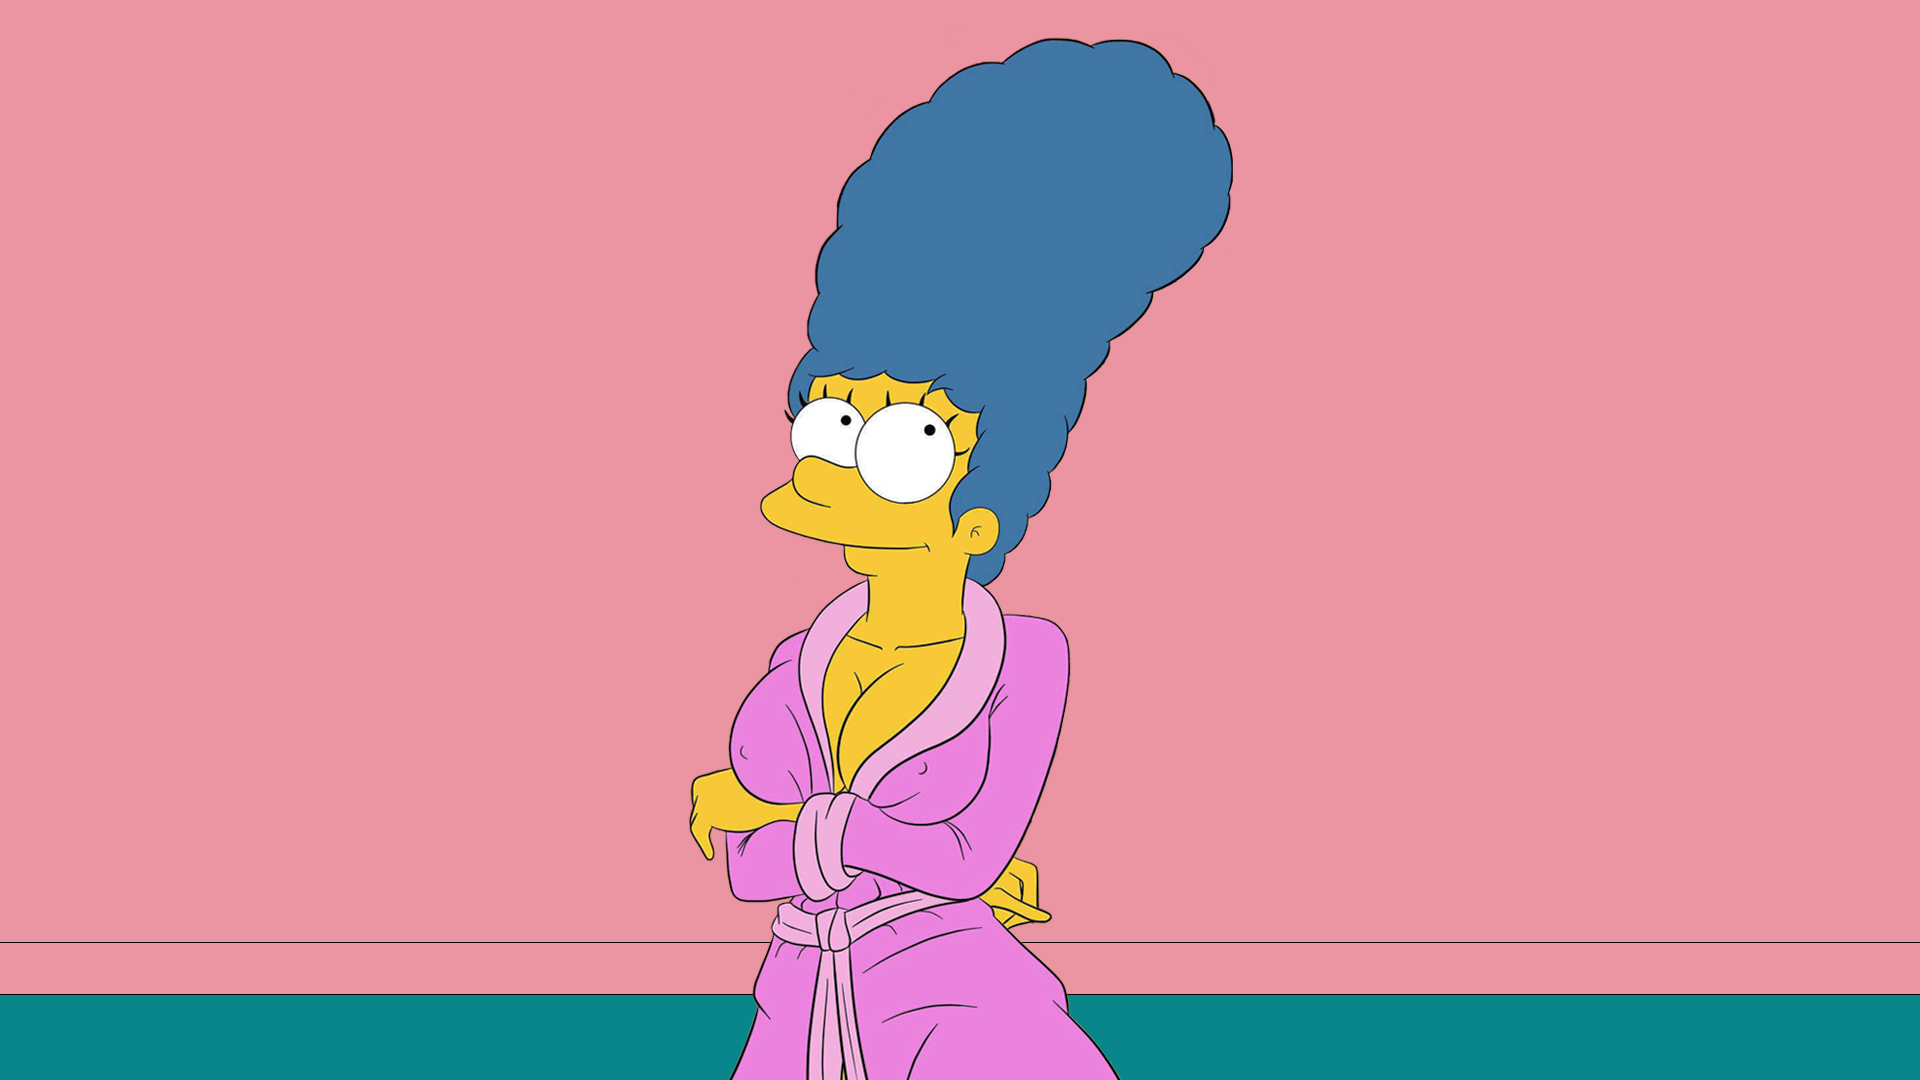 General 1920x1080 Marge Simpson The Simpsons boobs